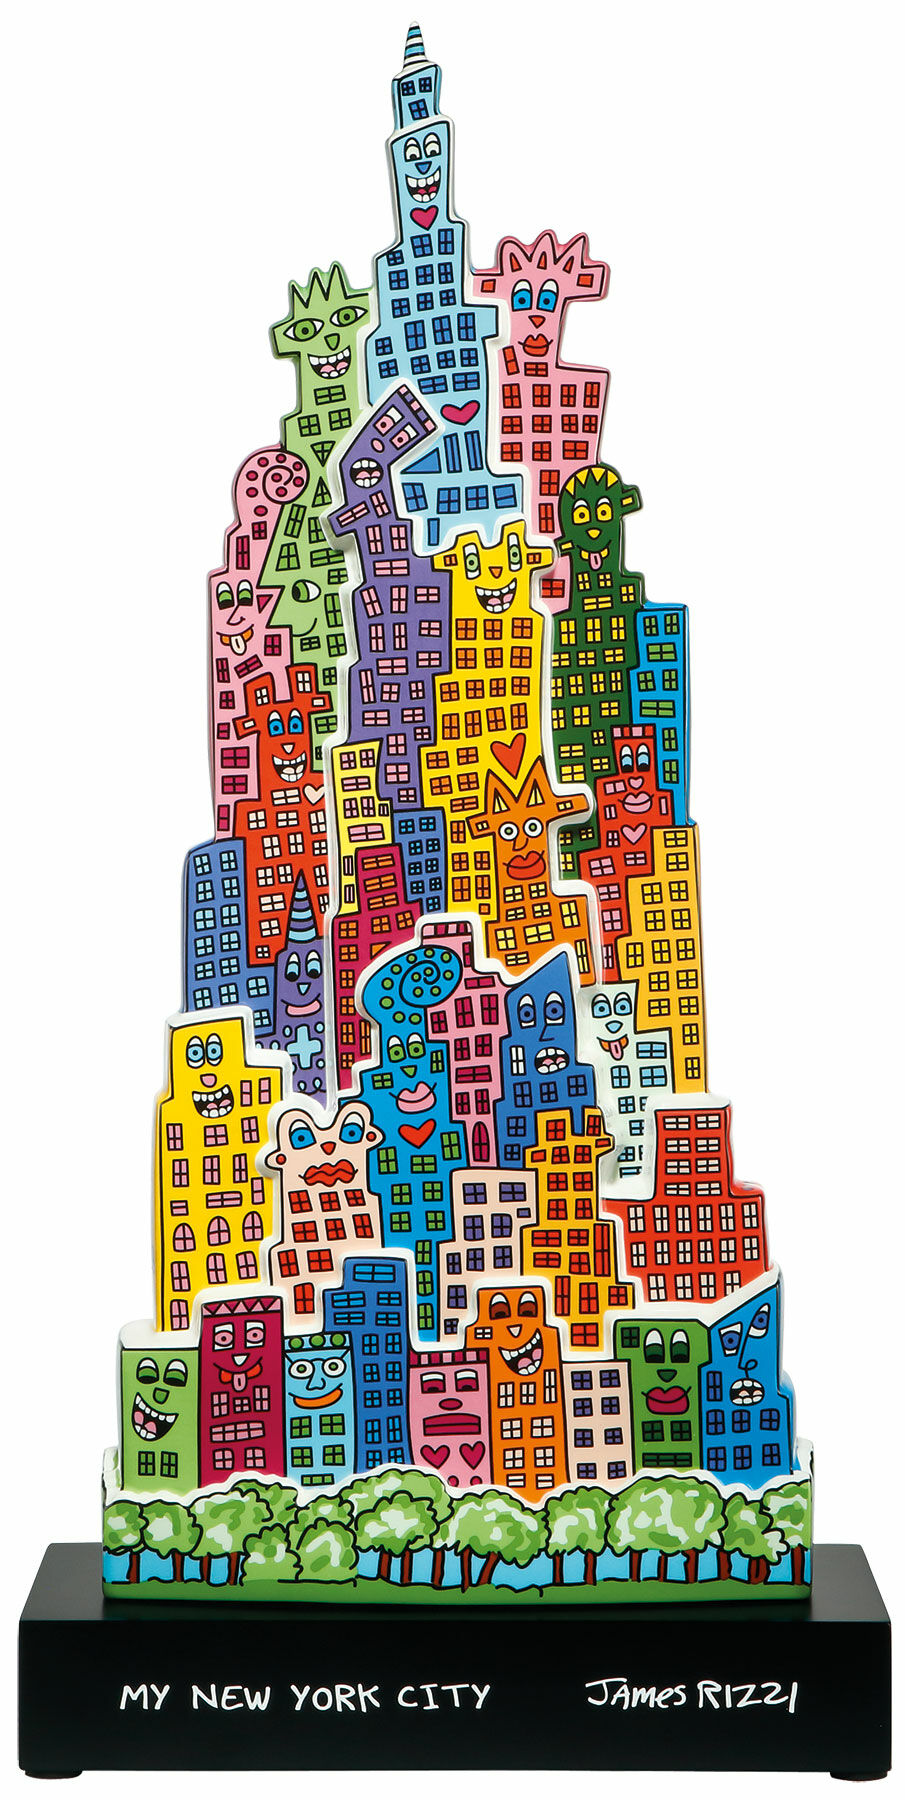 Porcelain object "The City that never sleeps" by James Rizzi